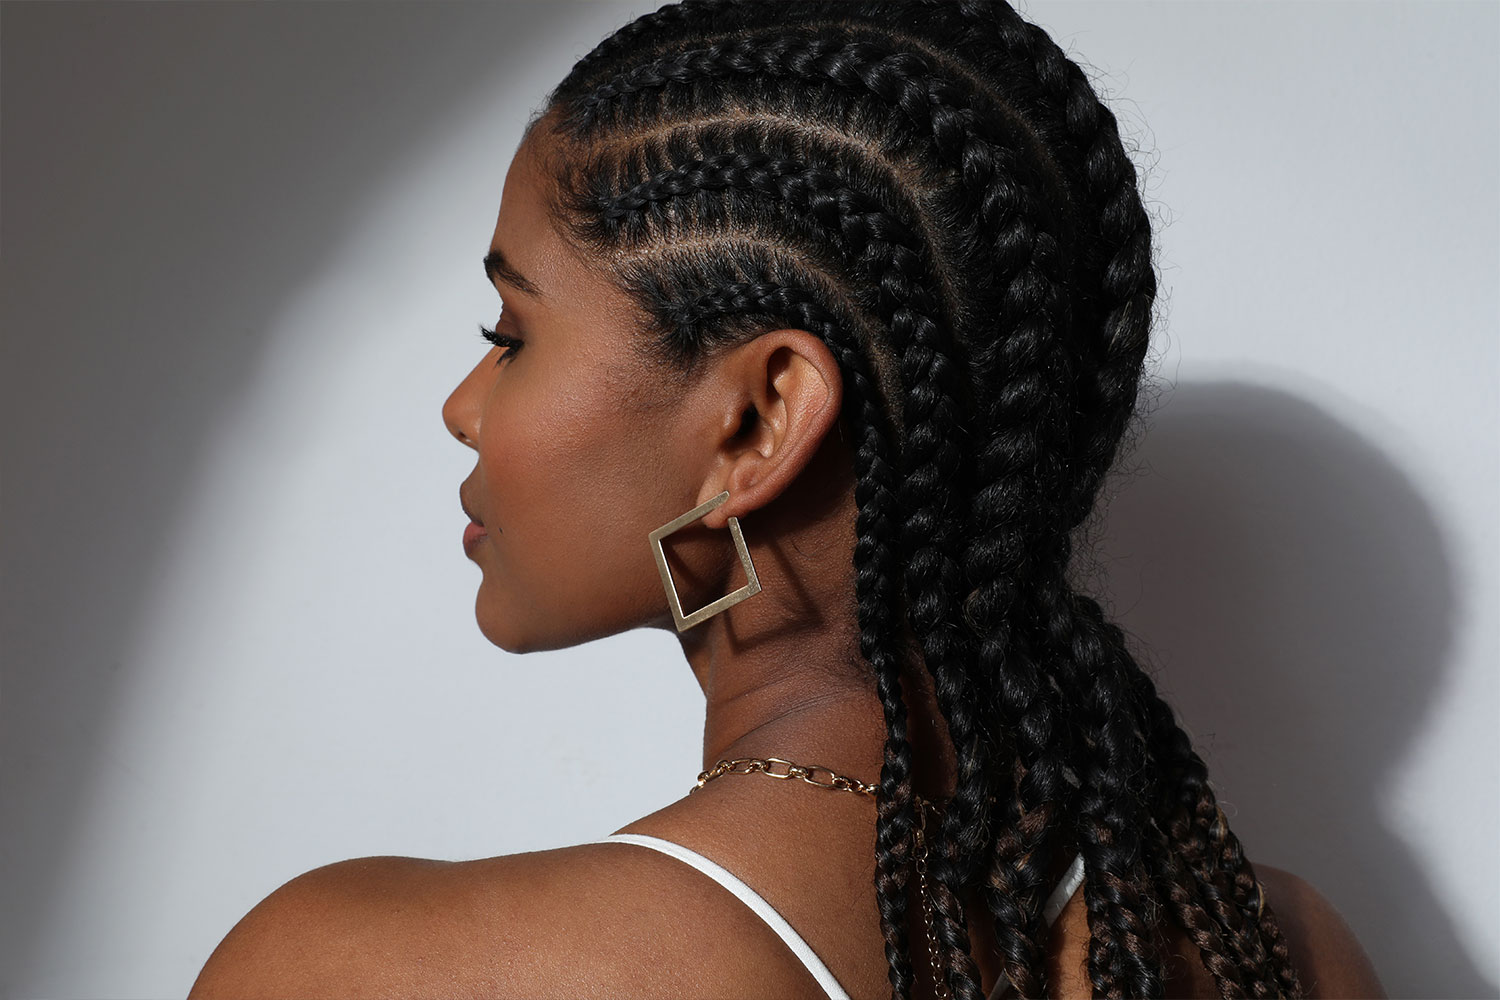 These 8 Awesome Braid Hairstyles are great., by Virgo hair braiding salon